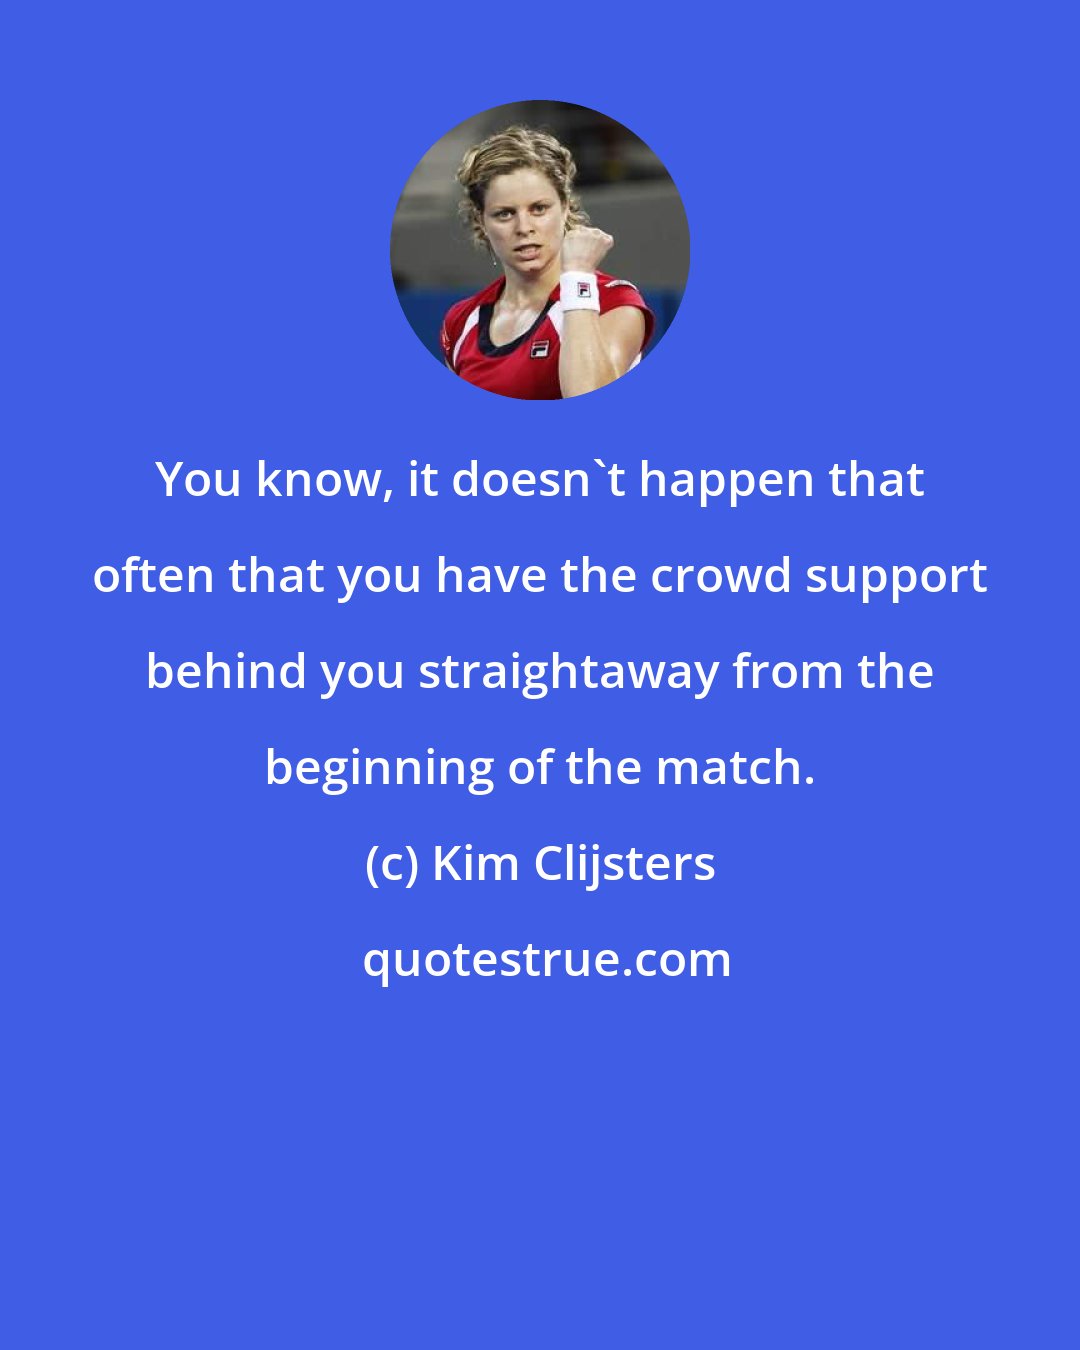 Kim Clijsters: You know, it doesn't happen that often that you have the crowd support behind you straightaway from the beginning of the match.